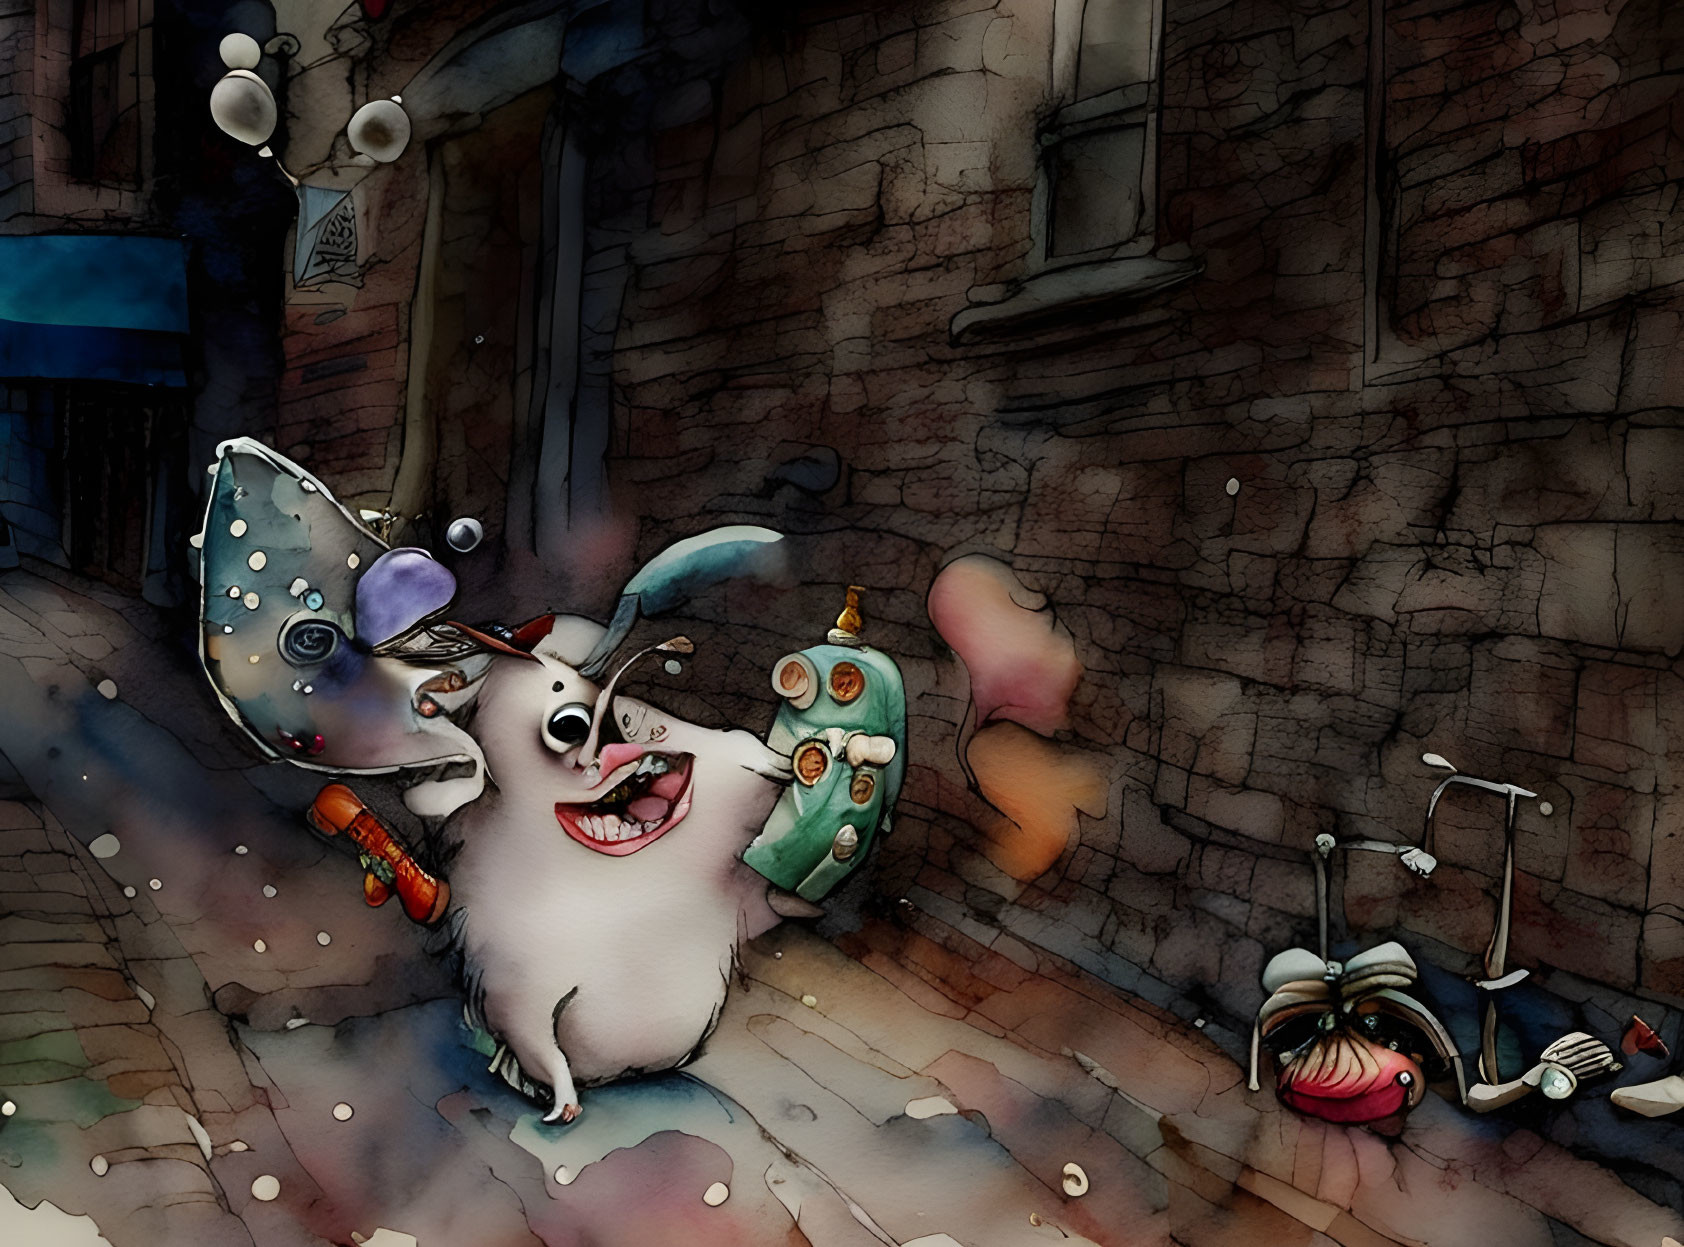 Ecstatic pig with pearl necklace and tiara splashing in puddle in narrow alley, disheart